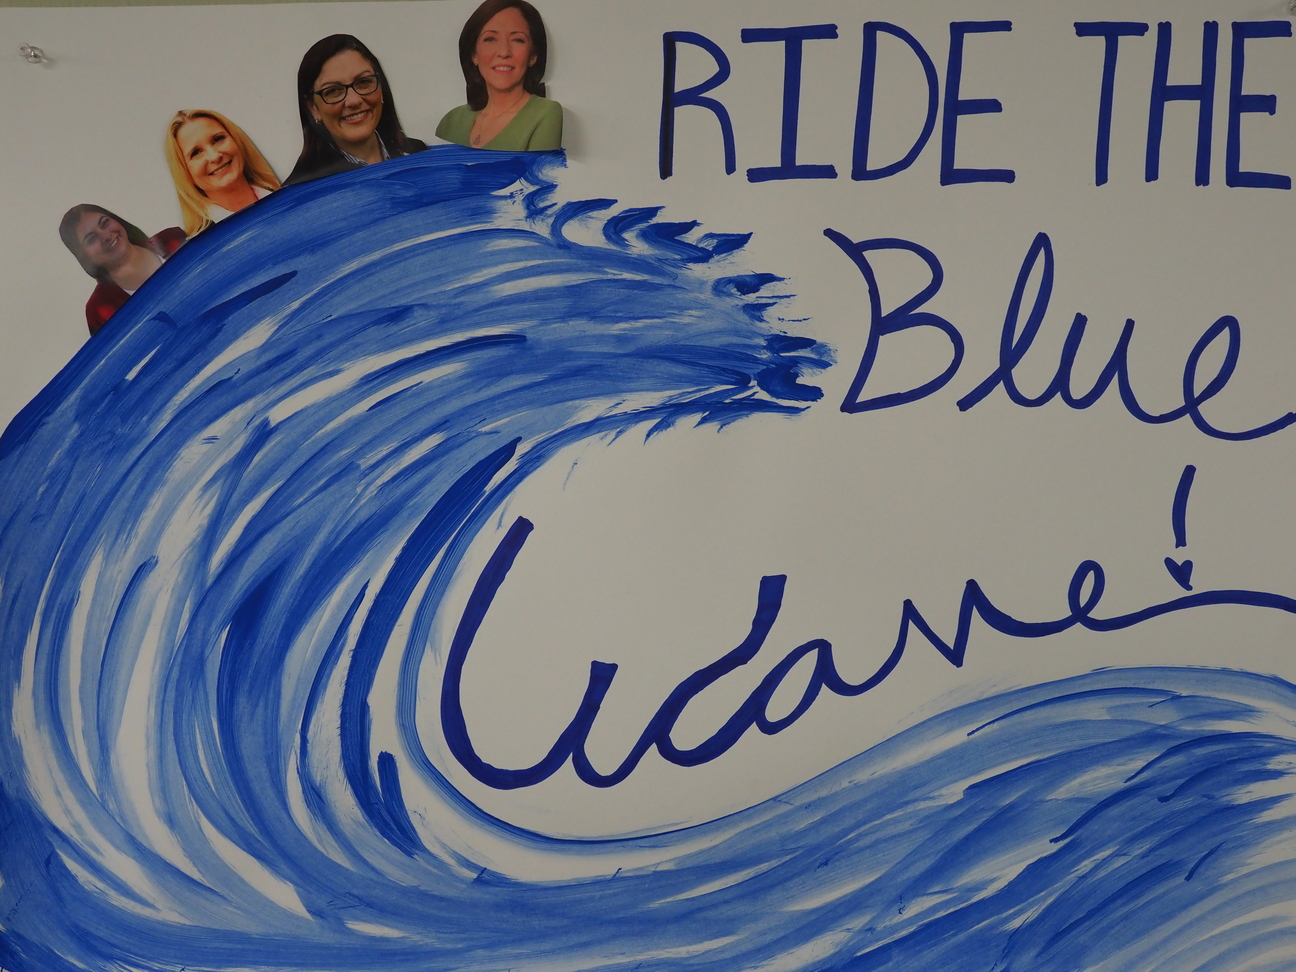 Ride the Blue Wave with Manka Dhingra, Patty Kuderer, Suzan DelBene, and Maria Cantwell